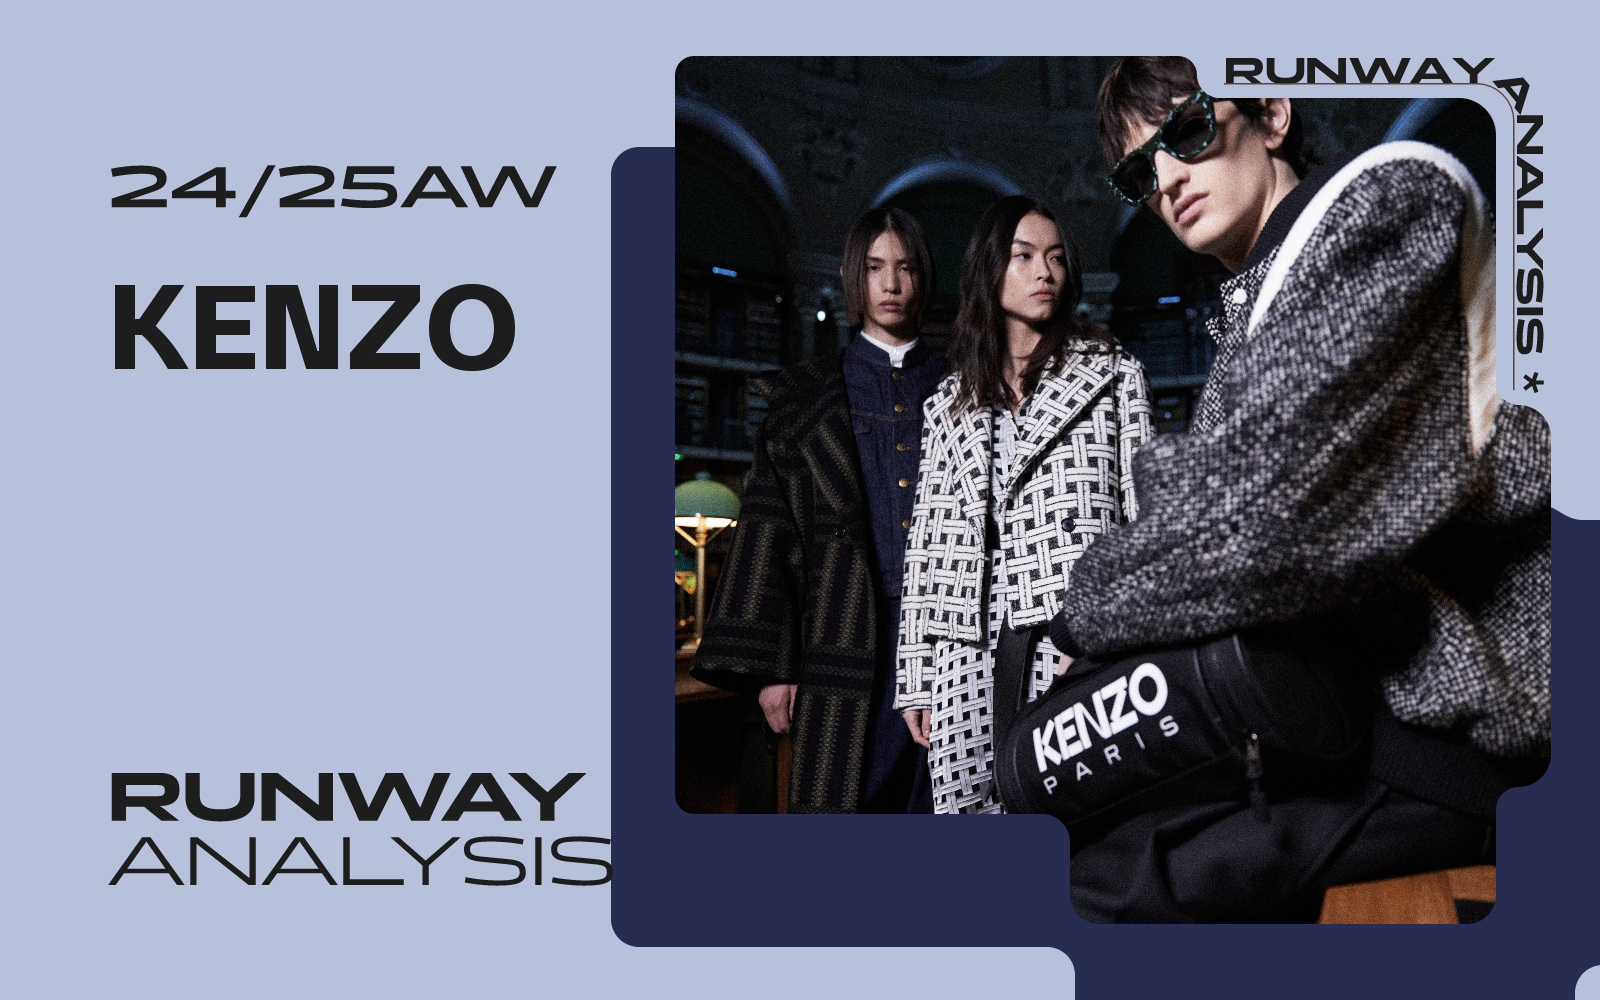 Cultural Fusion -- The Runway Analysis of KENZO